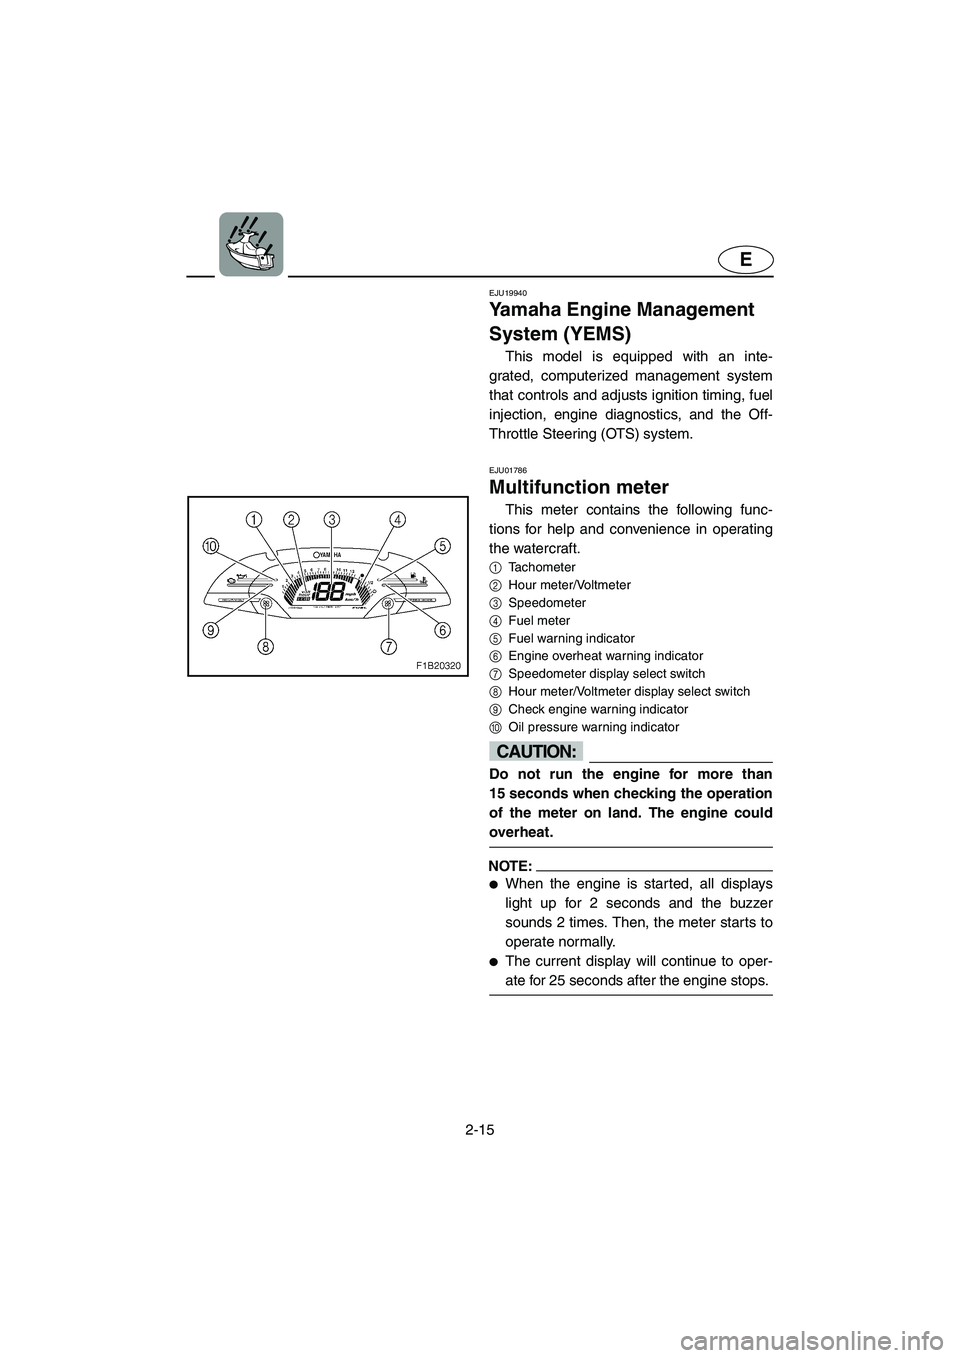 YAMAHA FX 2003  Owners Manual 2-15
E
EJU19940
Yamaha Engine Management 
System (YEMS) 
This model is equipped with an inte-
grated, computerized management system
that controls and adjusts ignition timing, fuel
injection, engine d